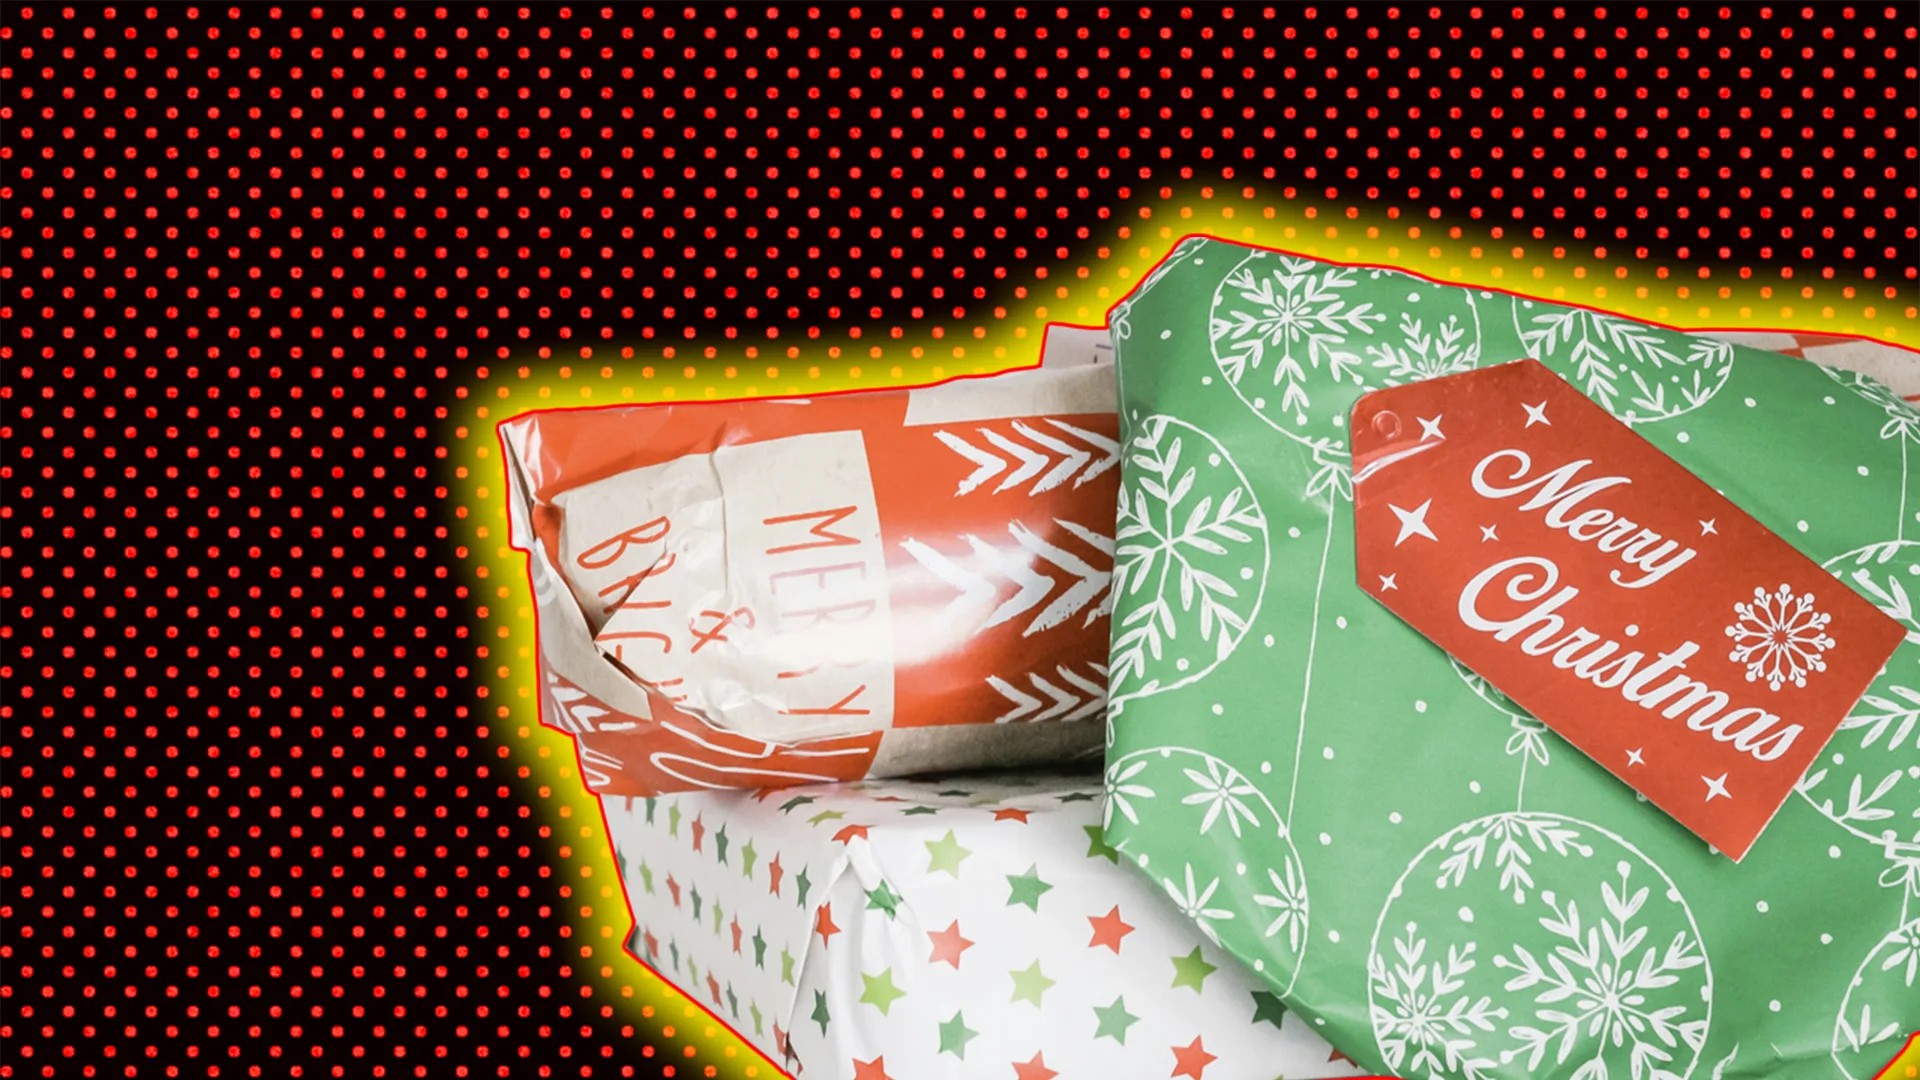 Wrapped Christmas presents, outlined by yellow halo effect on black and red-dotted background.